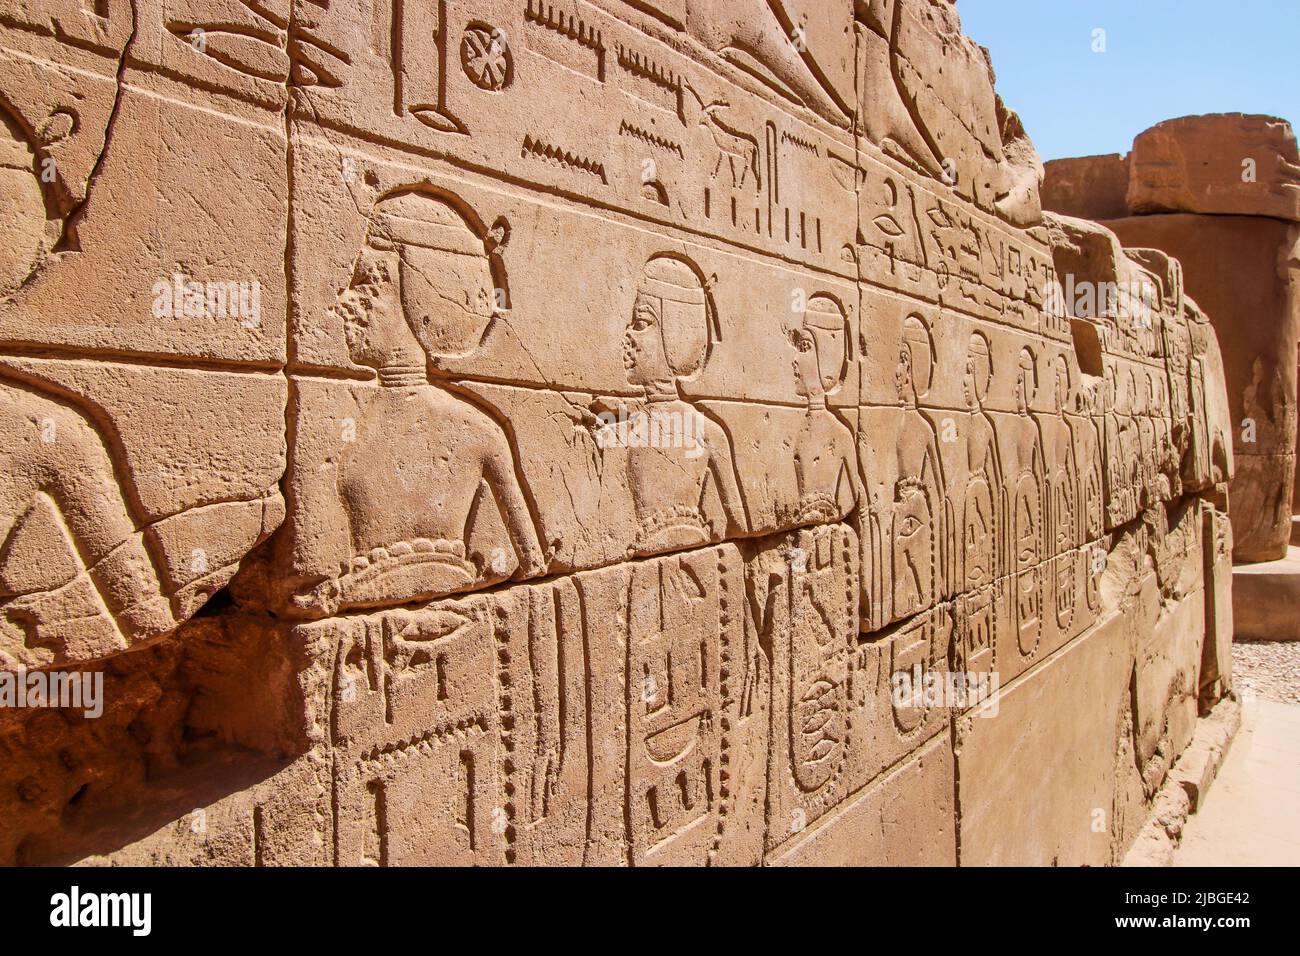 Old Egypt hieroglyphs carved on the stone wall in The Karnak Temple Complex, Luxor, Egypt (ancient Thebes). Stock Photo